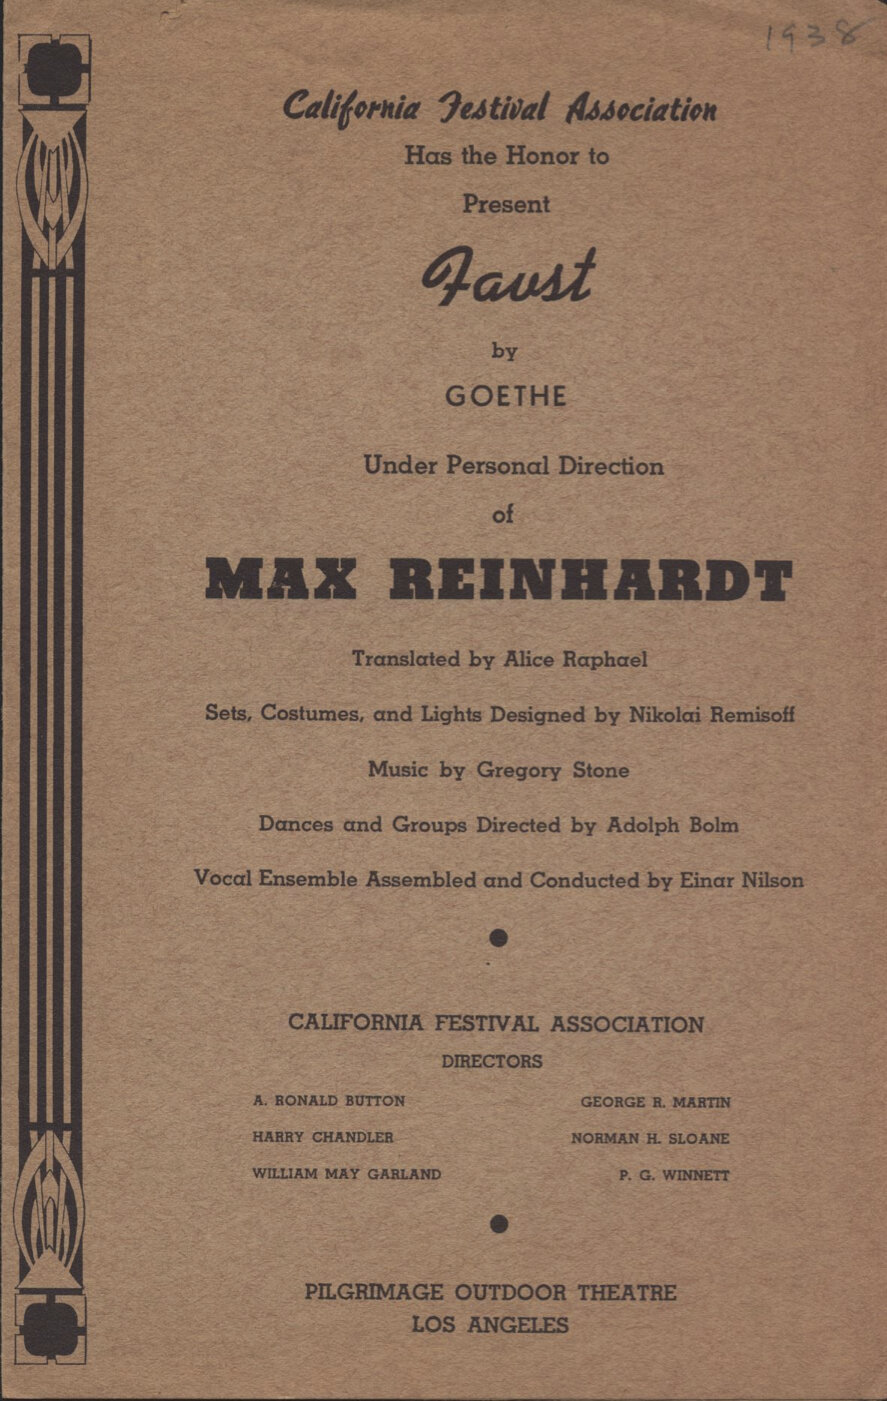 1938 Faust Program Ford Theatres Collection.jpg